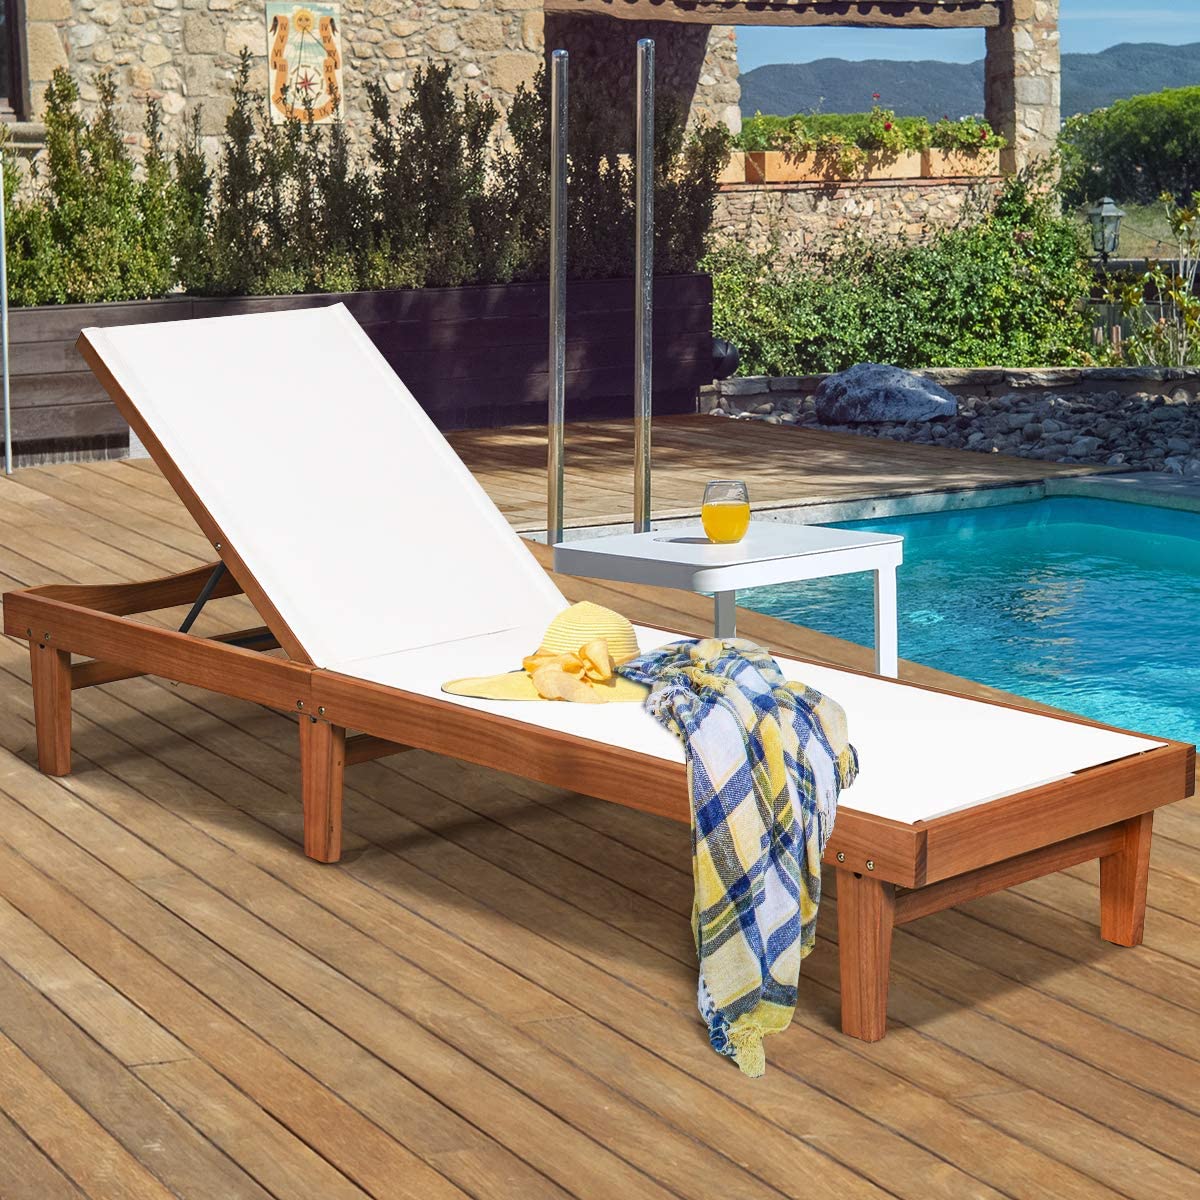 Patio Chaise Lounger with Adjustable Back Tangkula Outdoor Wooden Chaise Lounge Chair Eucalyptus Wood Reclining Lounge Chair with Breathable Fabric for Poolside Lawn Backyard 1, White 